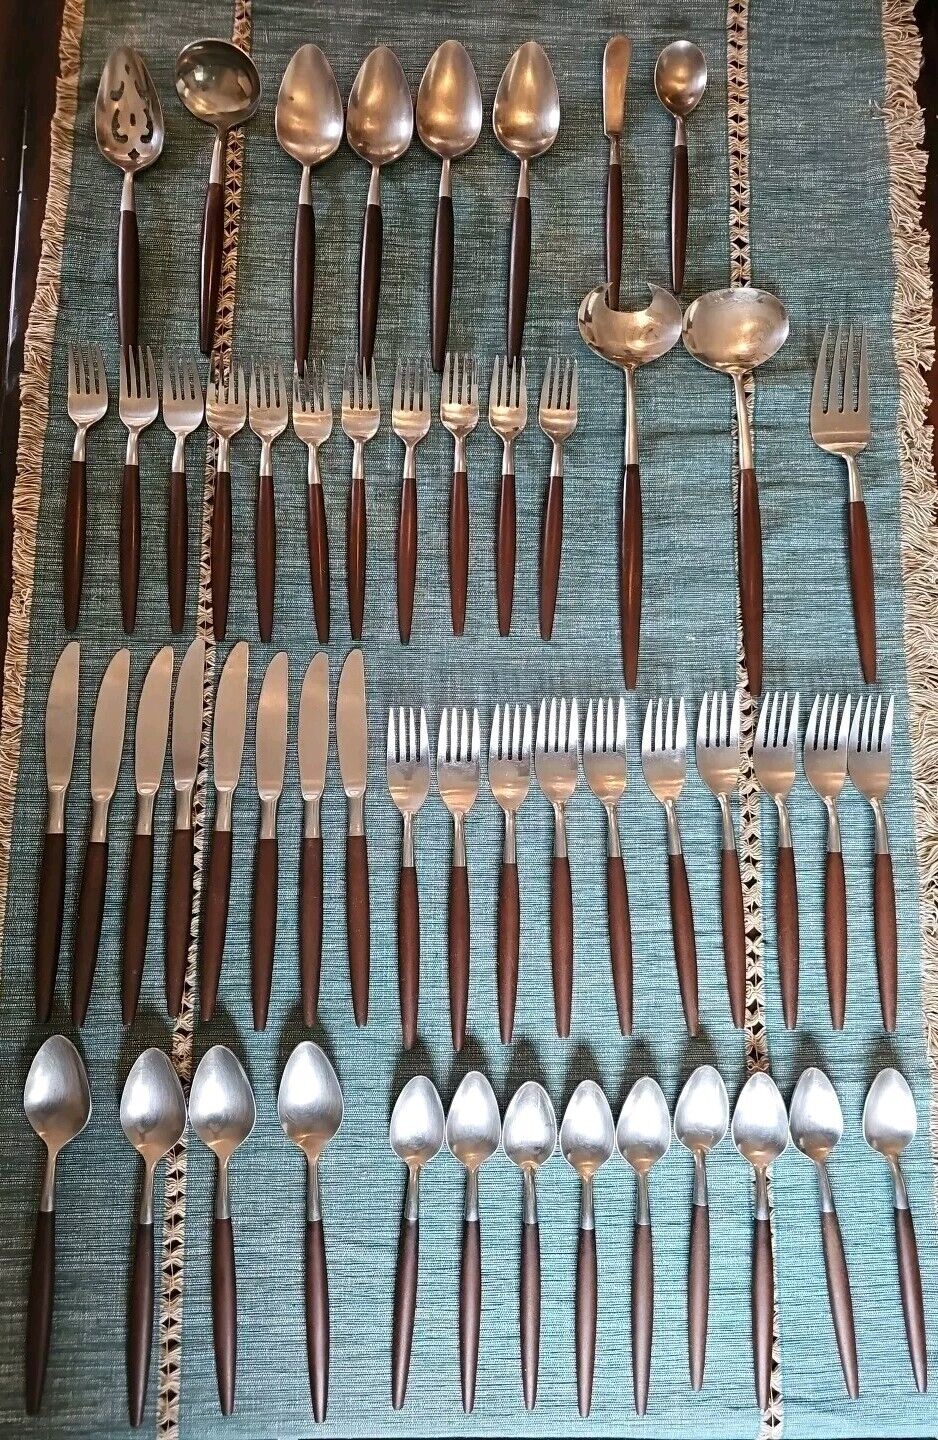 AMERICAN TEMPO MCM 54 pcs Stainless Canoe Muffin faux Wood Flatware Japan